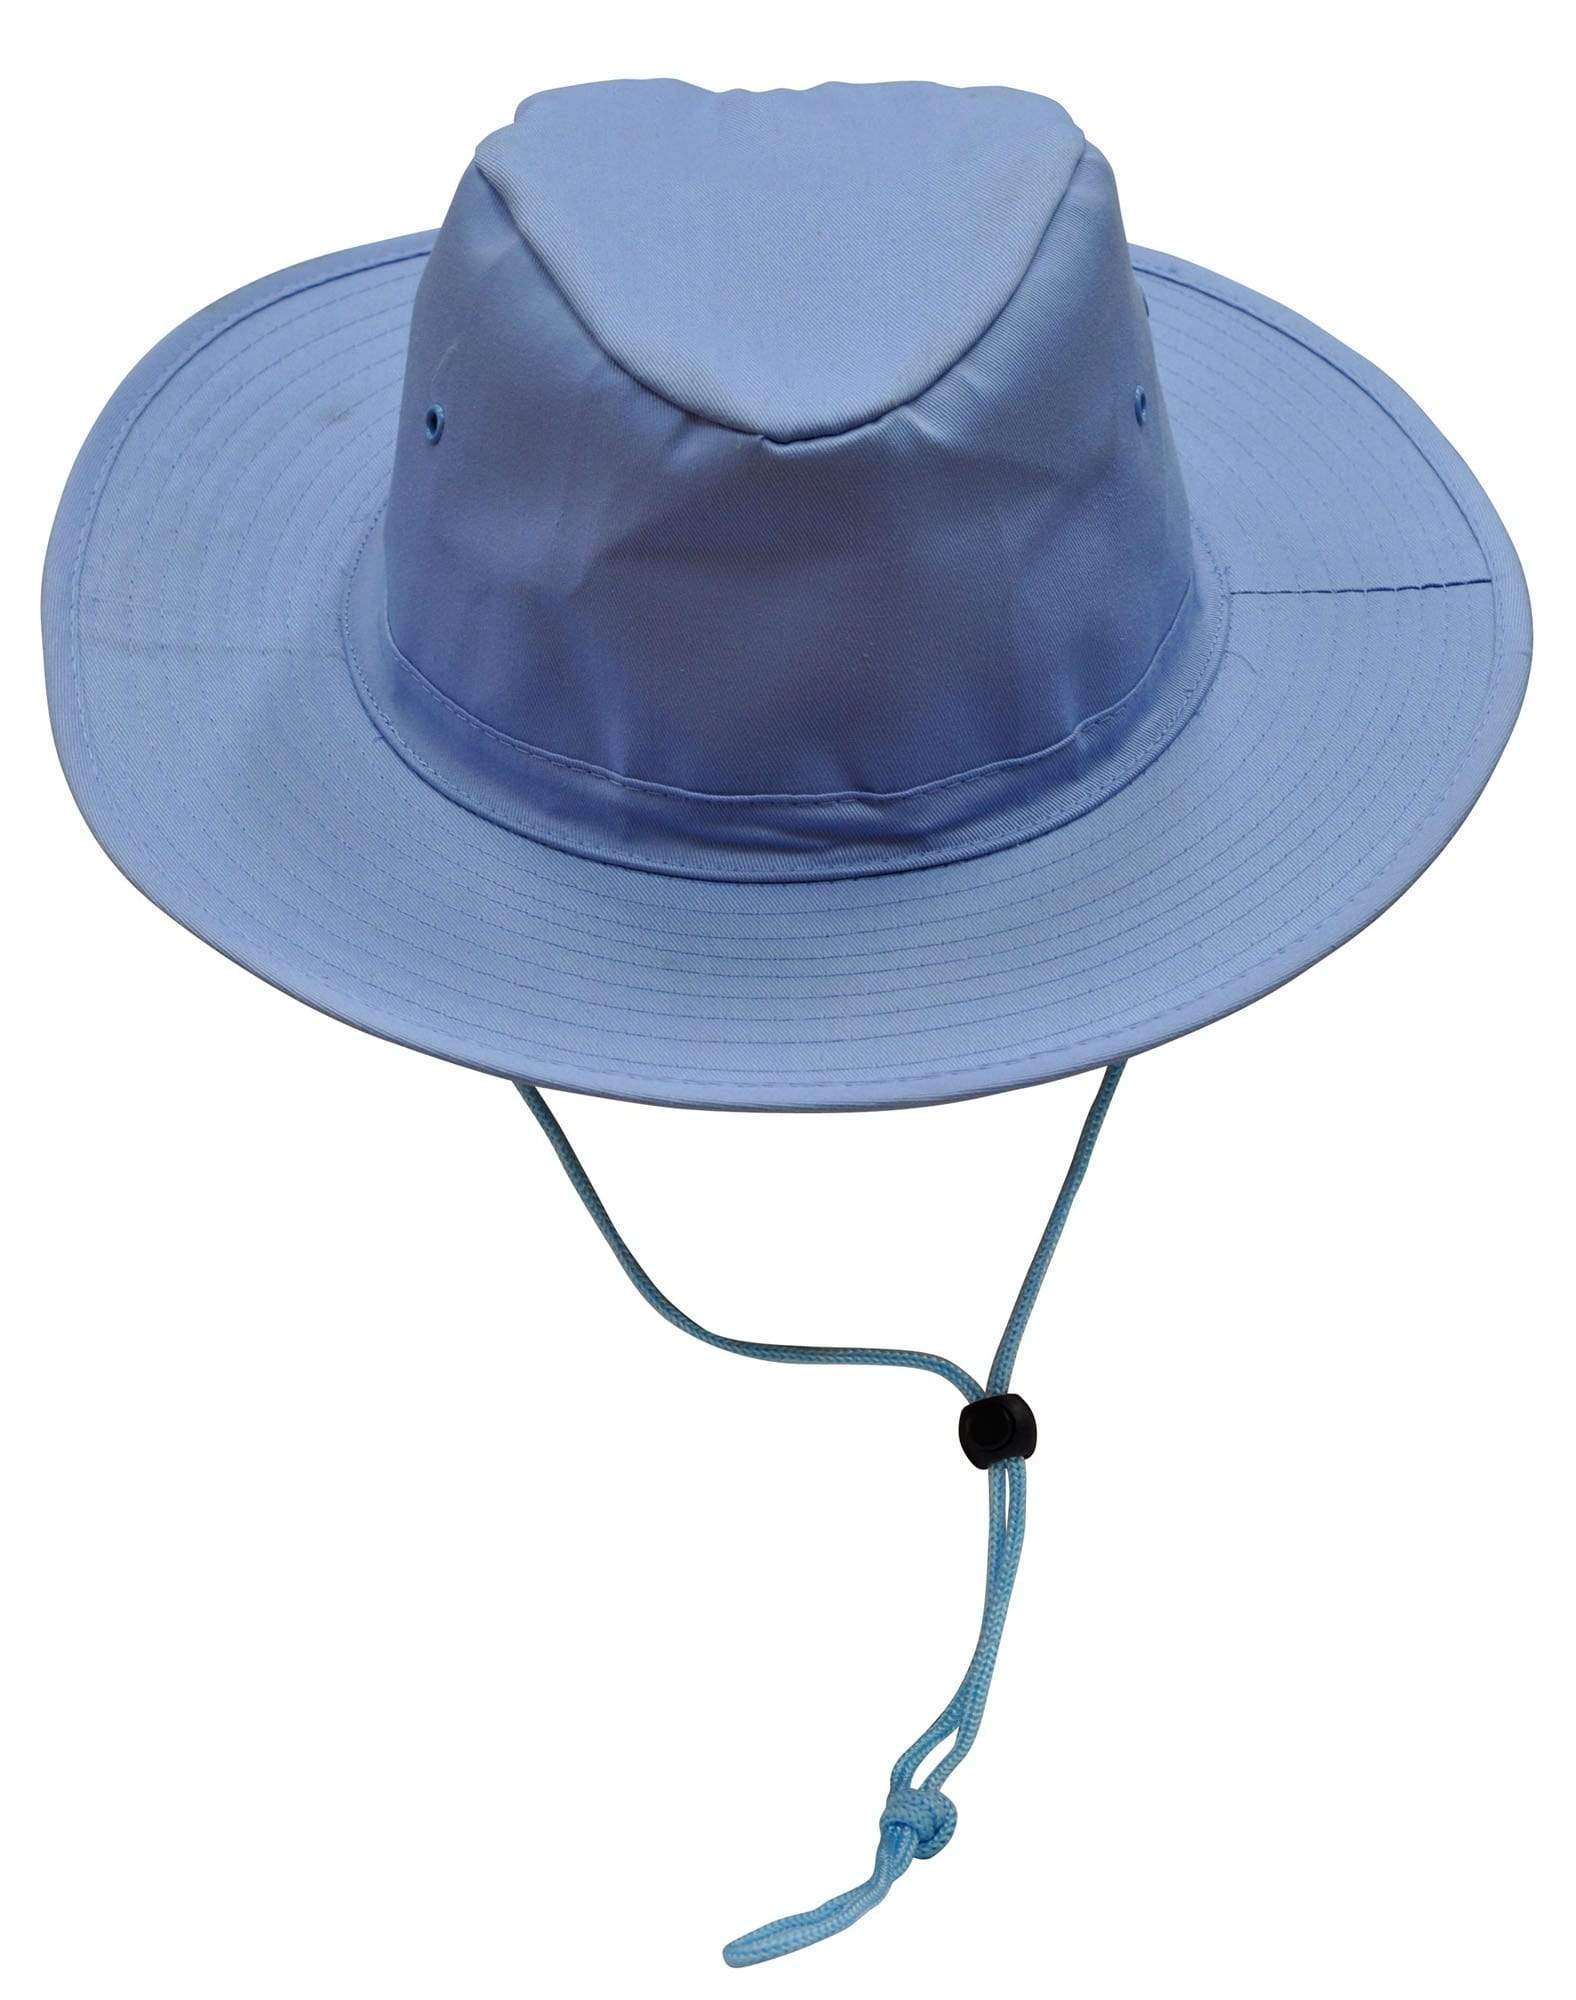 Winning Spirit Active Wear Skyblue / S Slouch Hat With Break-away Clip Strap H1026